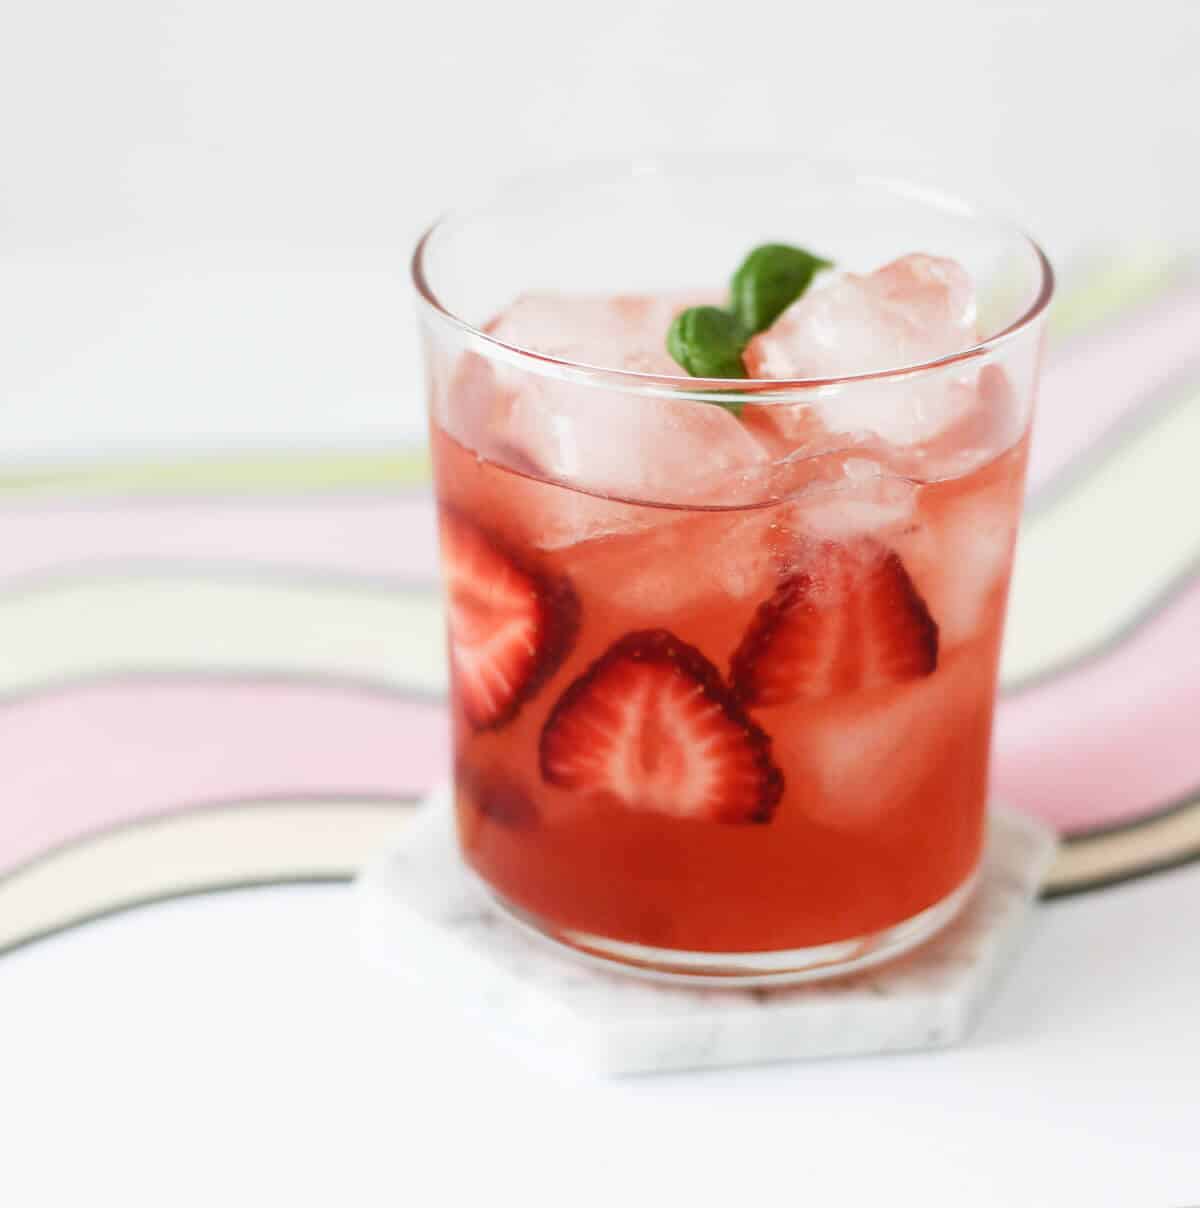 Clear glass filled with pink cocktail, sliced strawberries, ice and a sprig of basil.